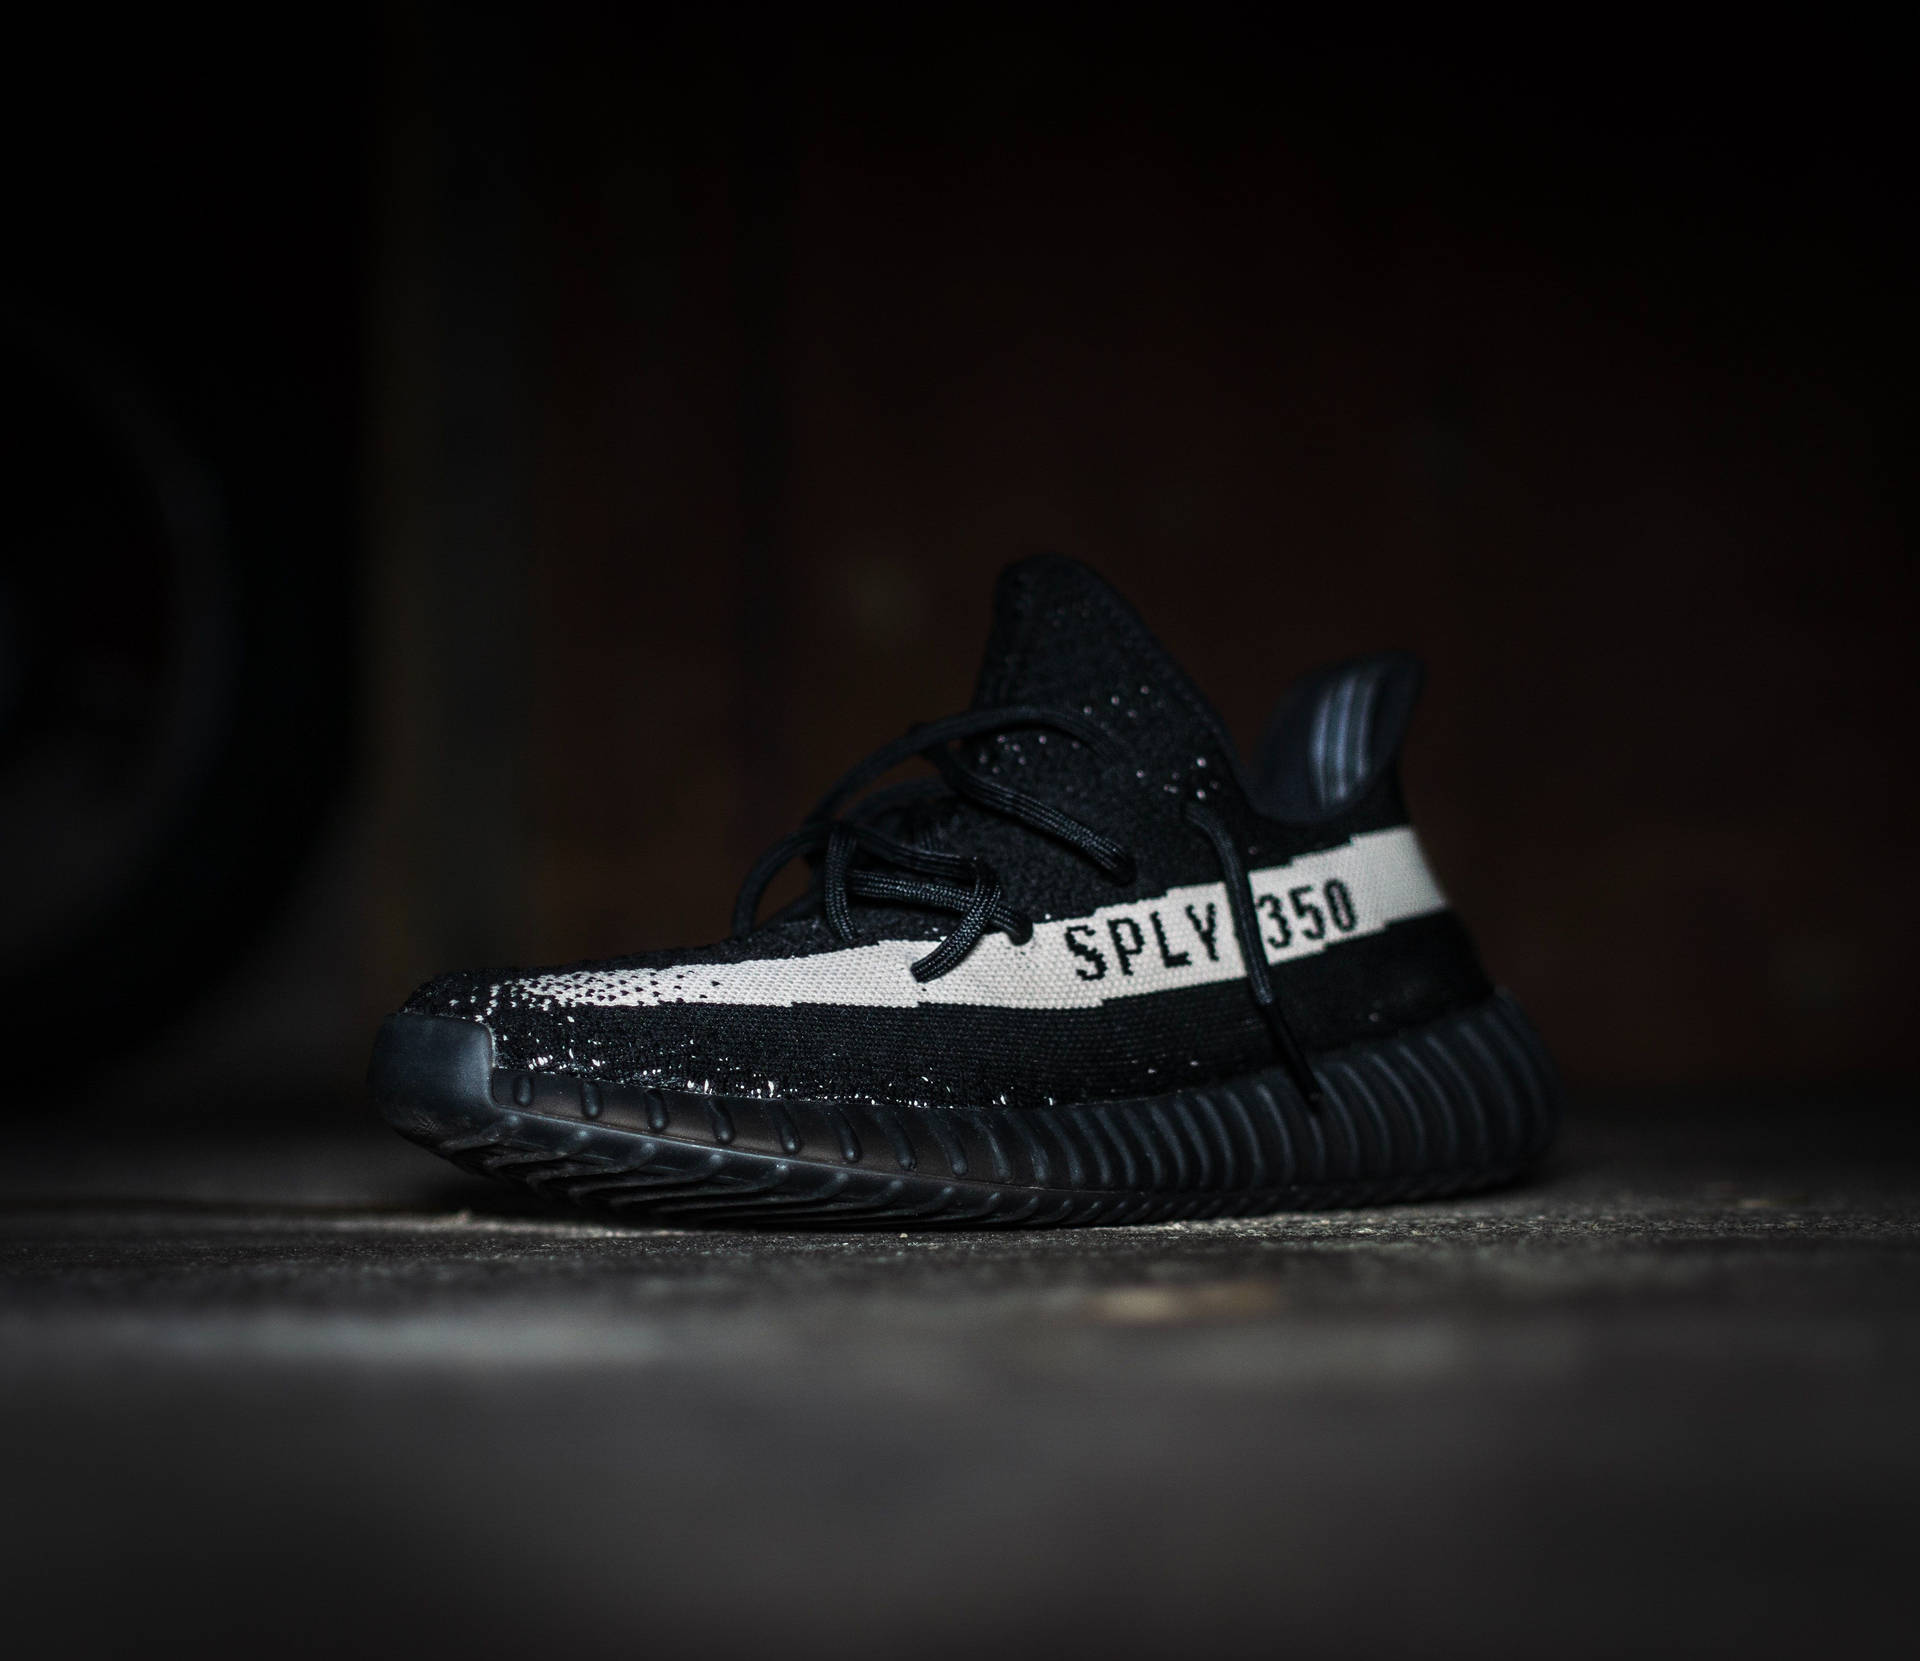 Sneaker Yeezy Boost 350 Black And White Wallpaper